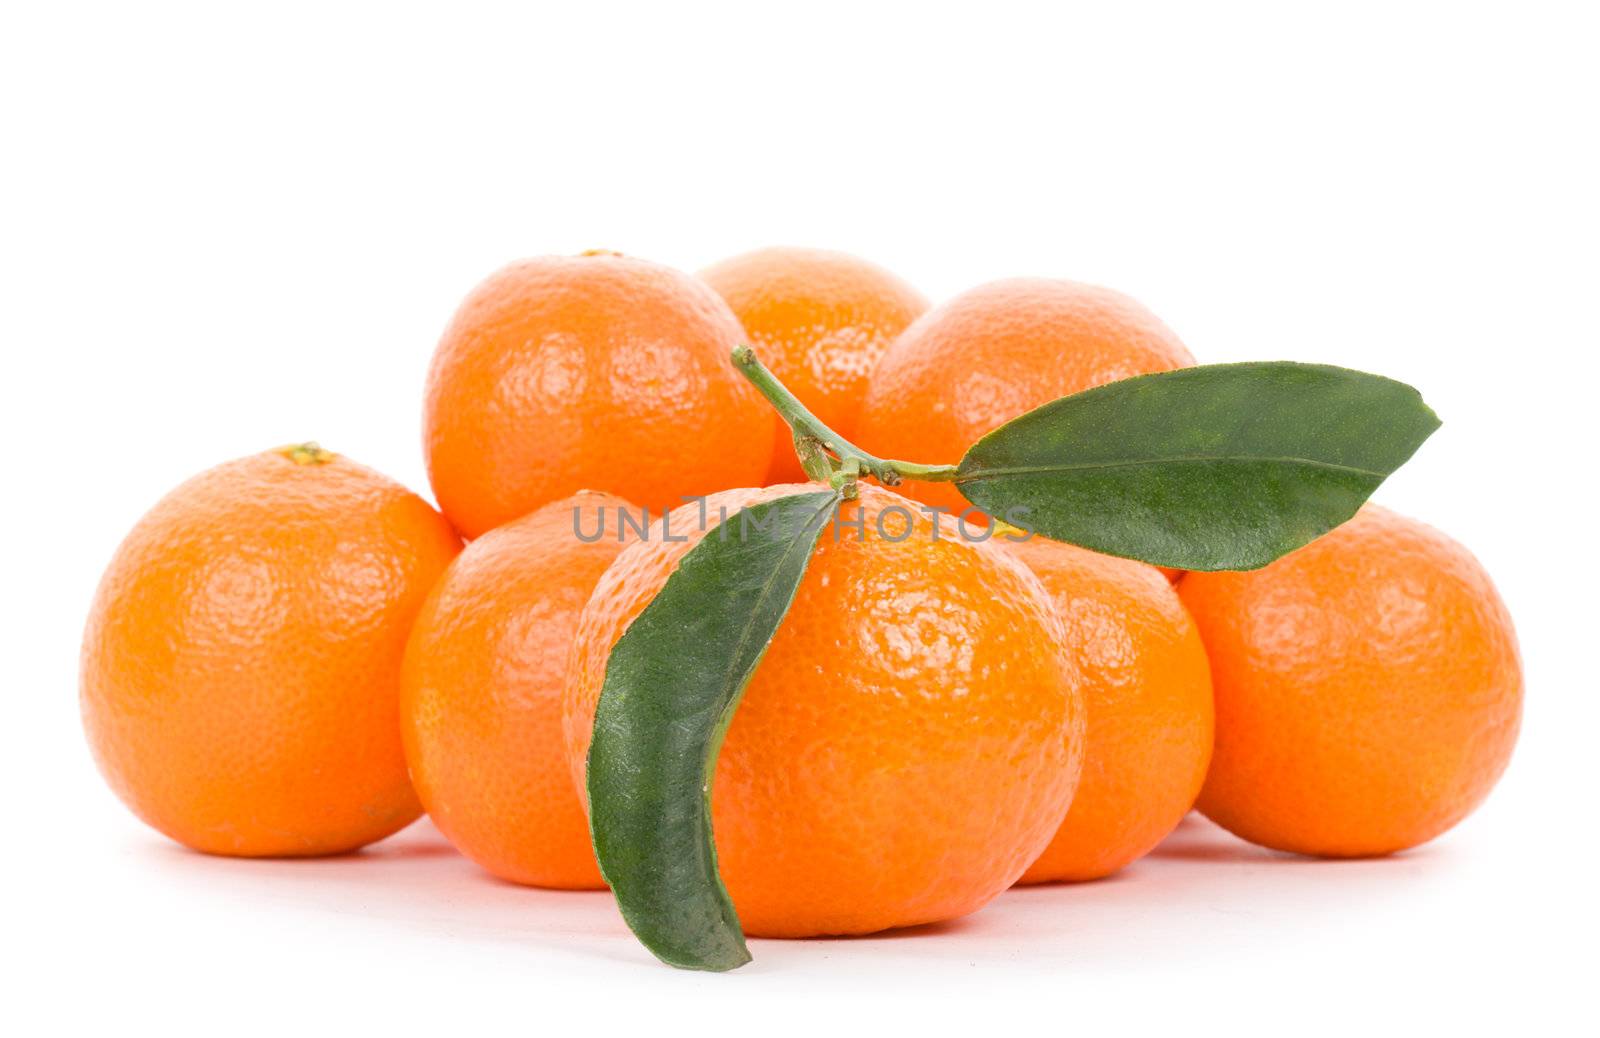  tangerines, isolated on white